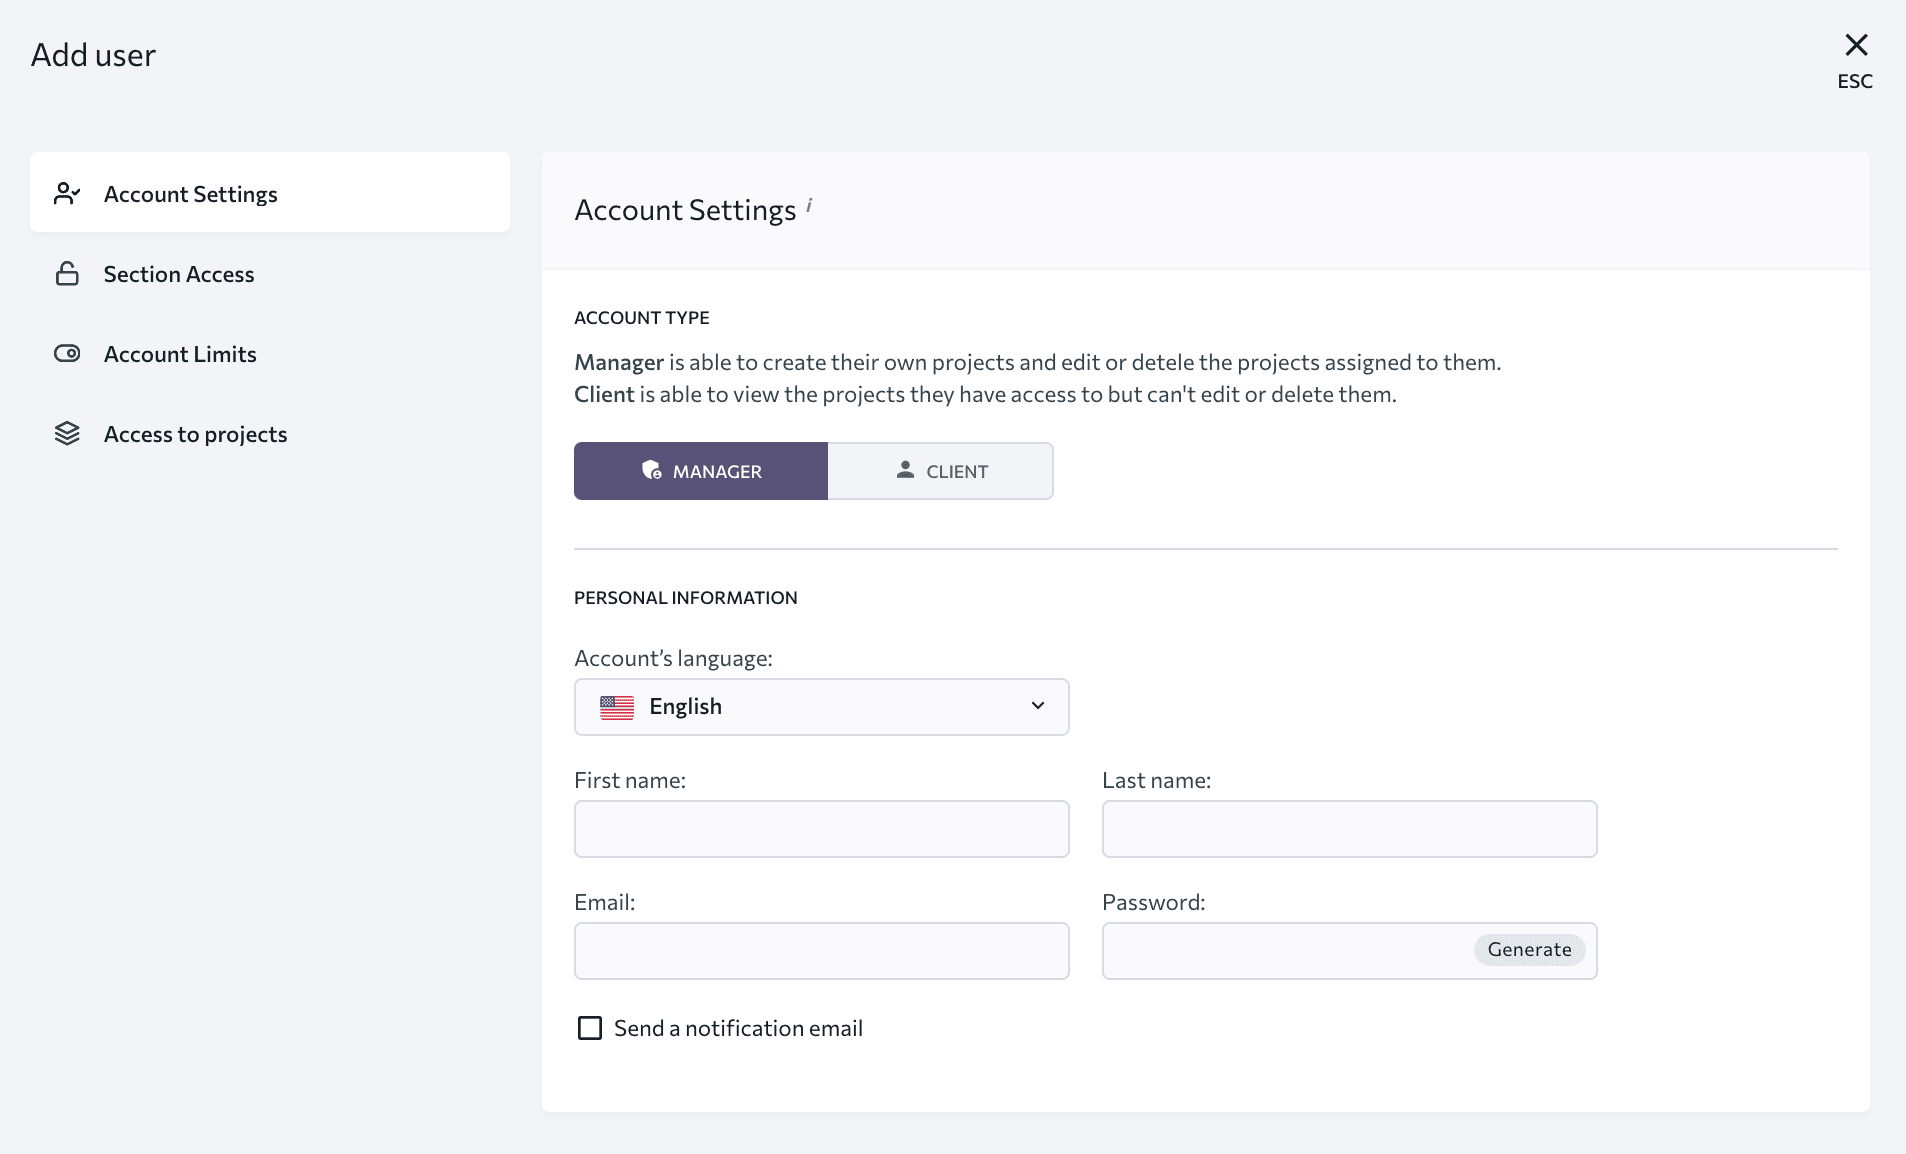 Add users to SE Ranking account